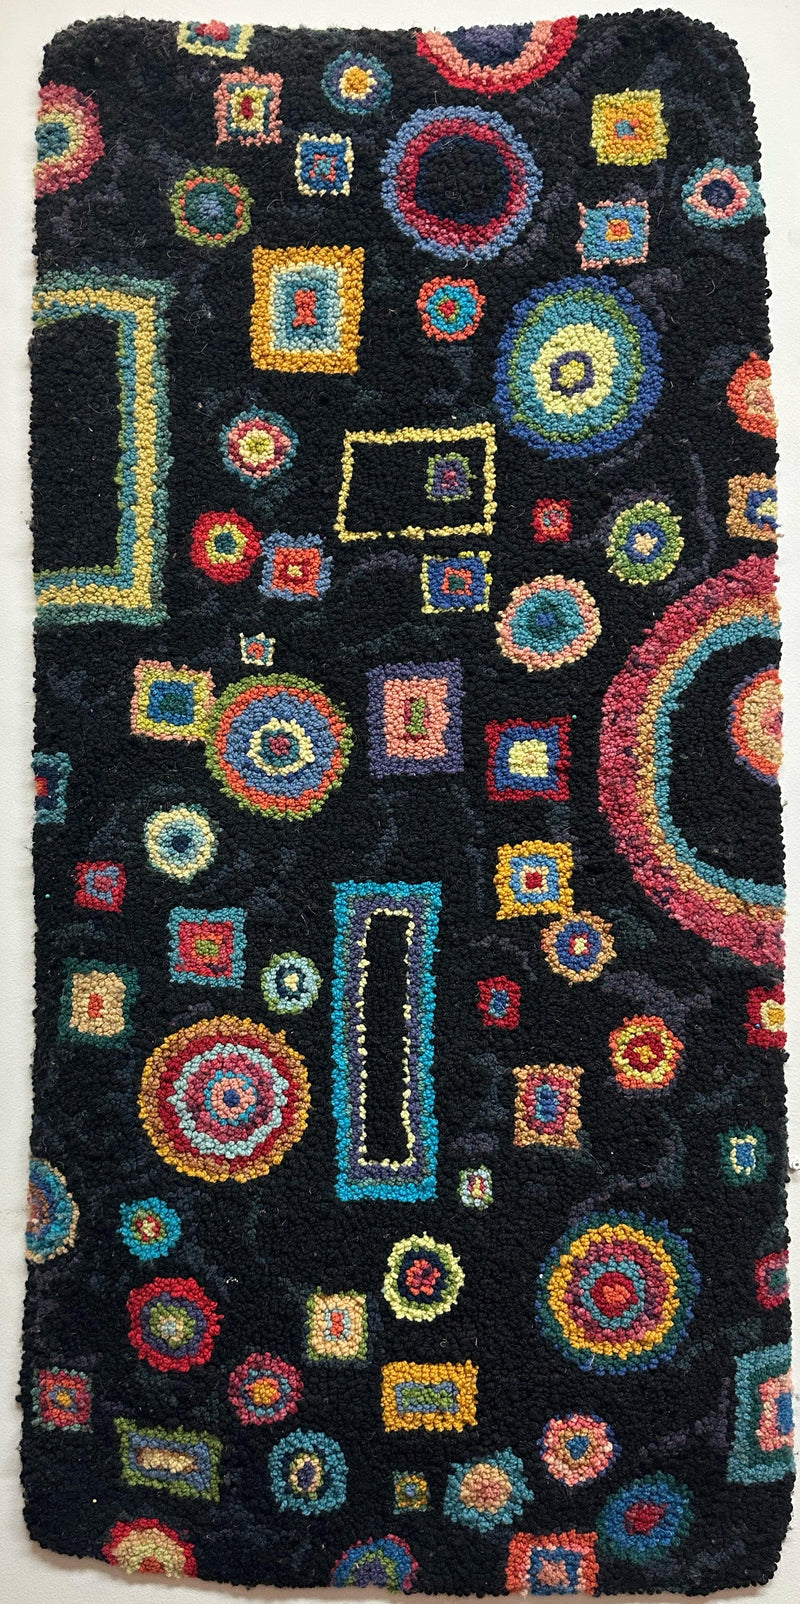 update alt-text with template Eclipse, 52" x 24"-Rugs for sale-Deanne Fitzpatrick Rug Hooking Studio-Rug Hooking Kit -Rug Hooking Pattern -Rug Hooking -Deanne Fitzpatrick Rug Hooking Studio -Is rug hooking the same as punch needle?